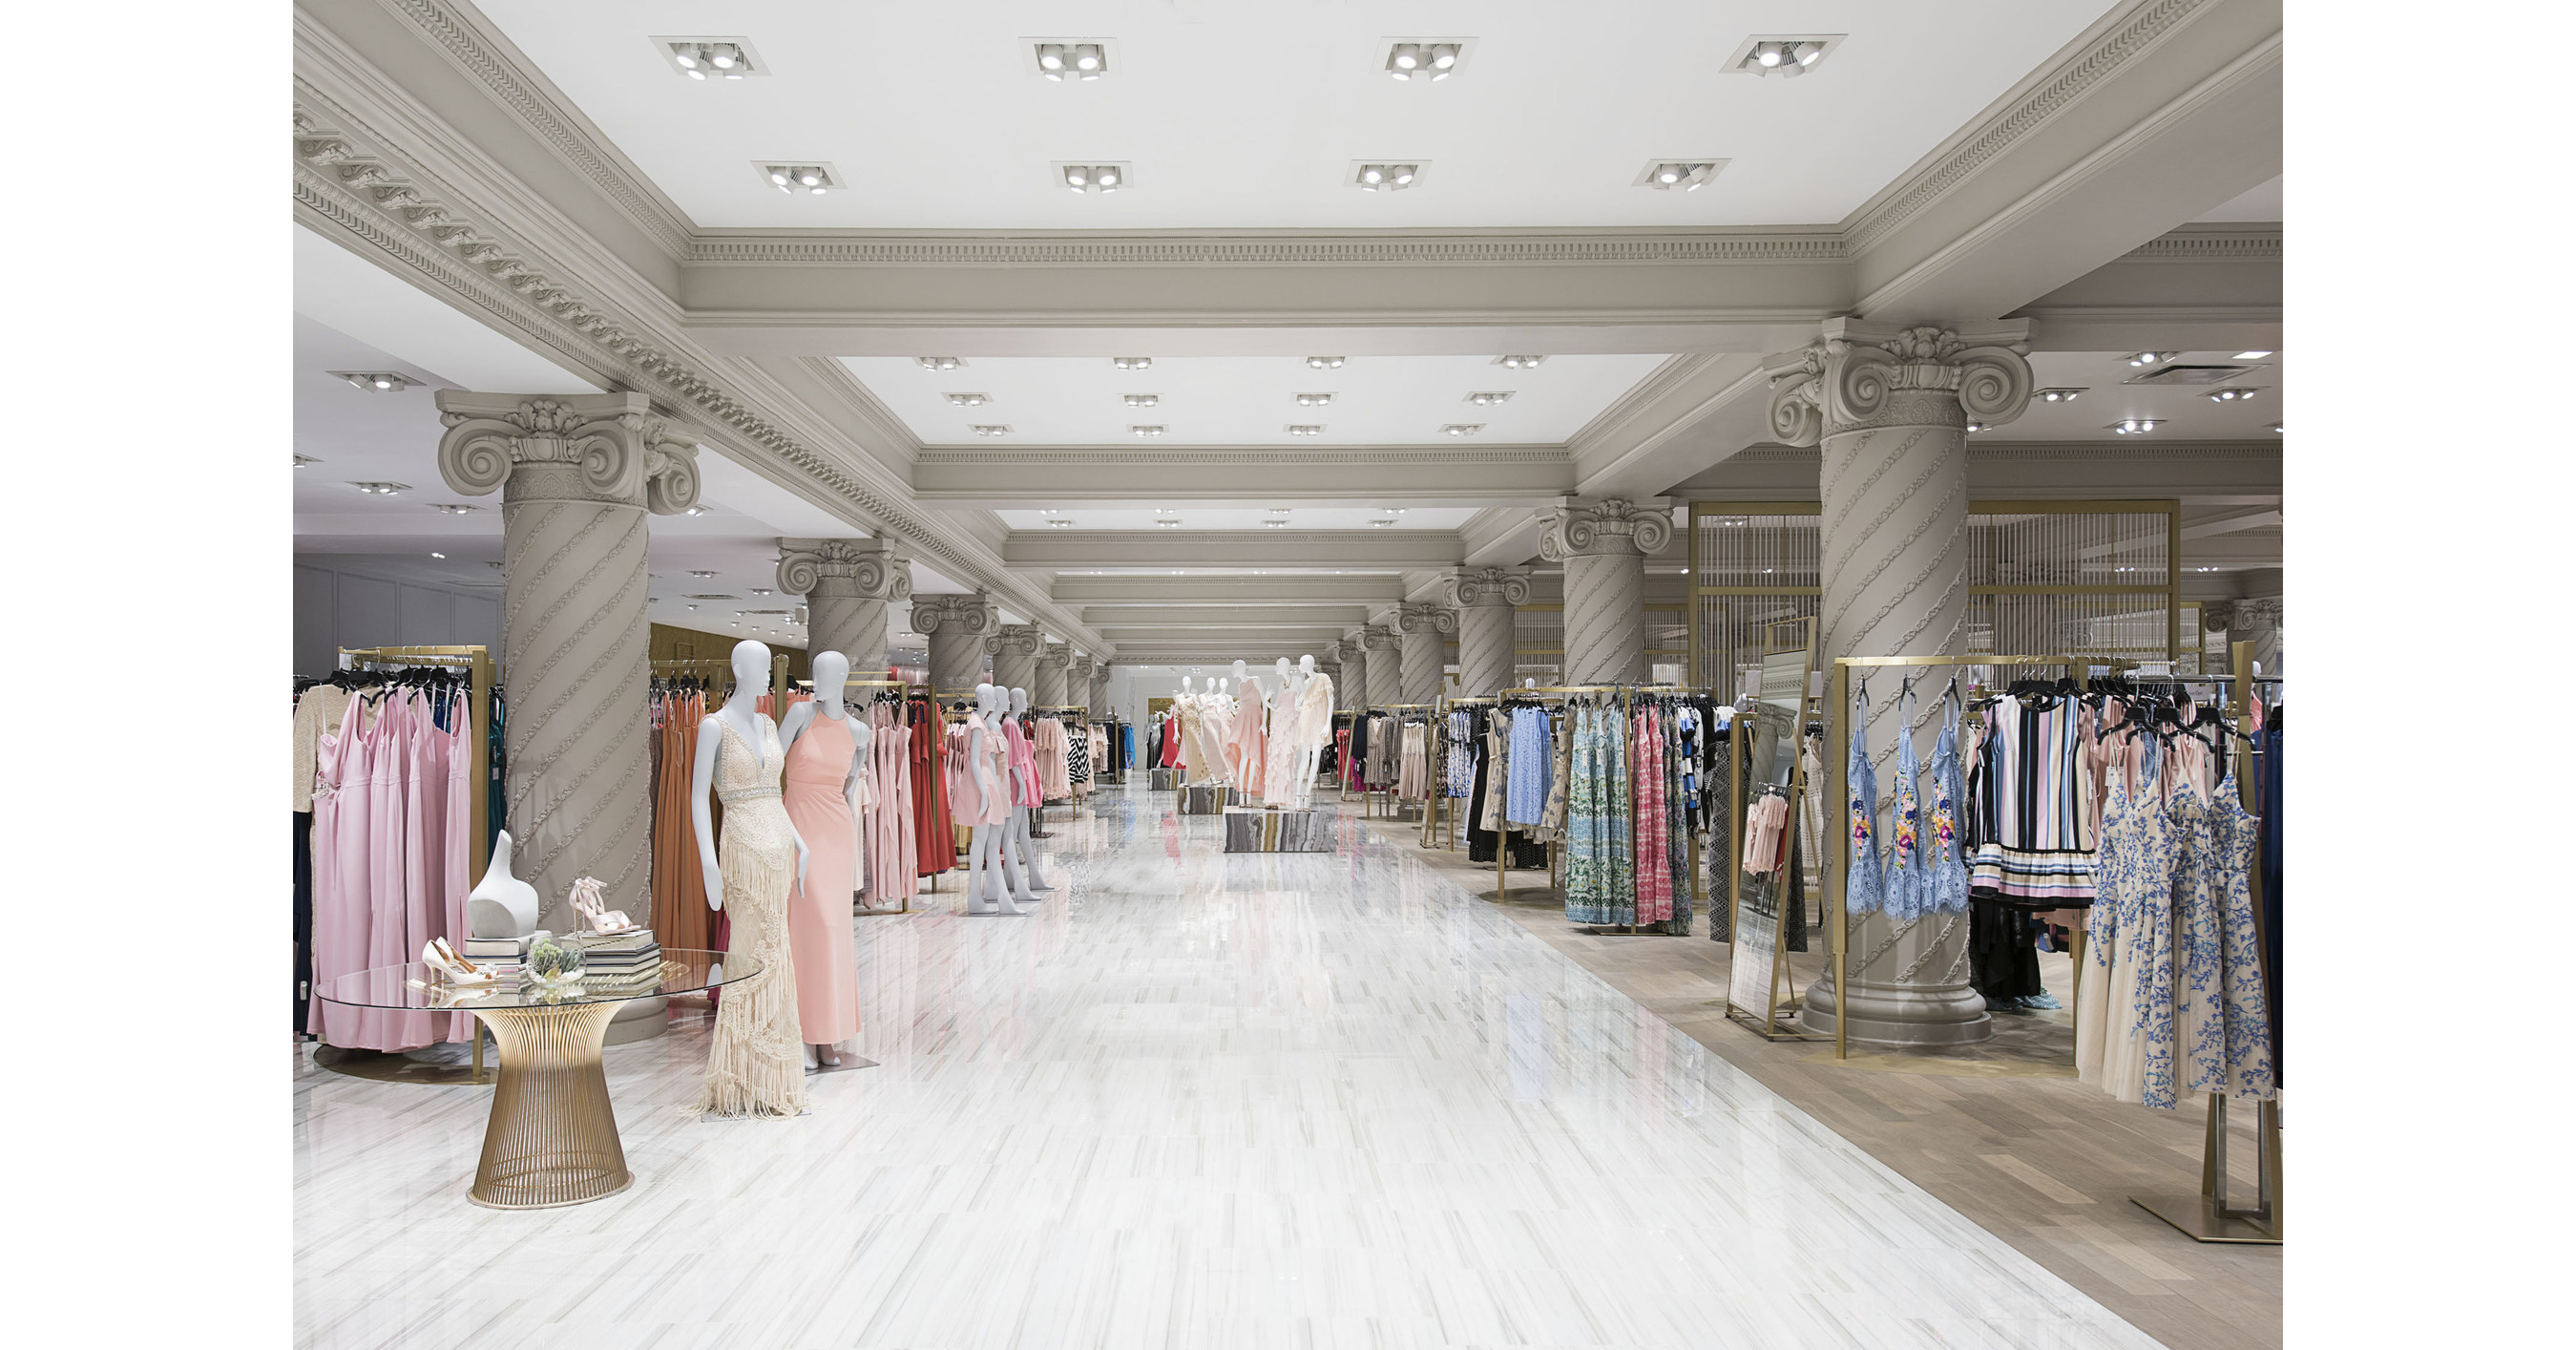 Lord & Taylor Hopes To Lure Customers With the Largest Dress Floor In  America - Fashionista